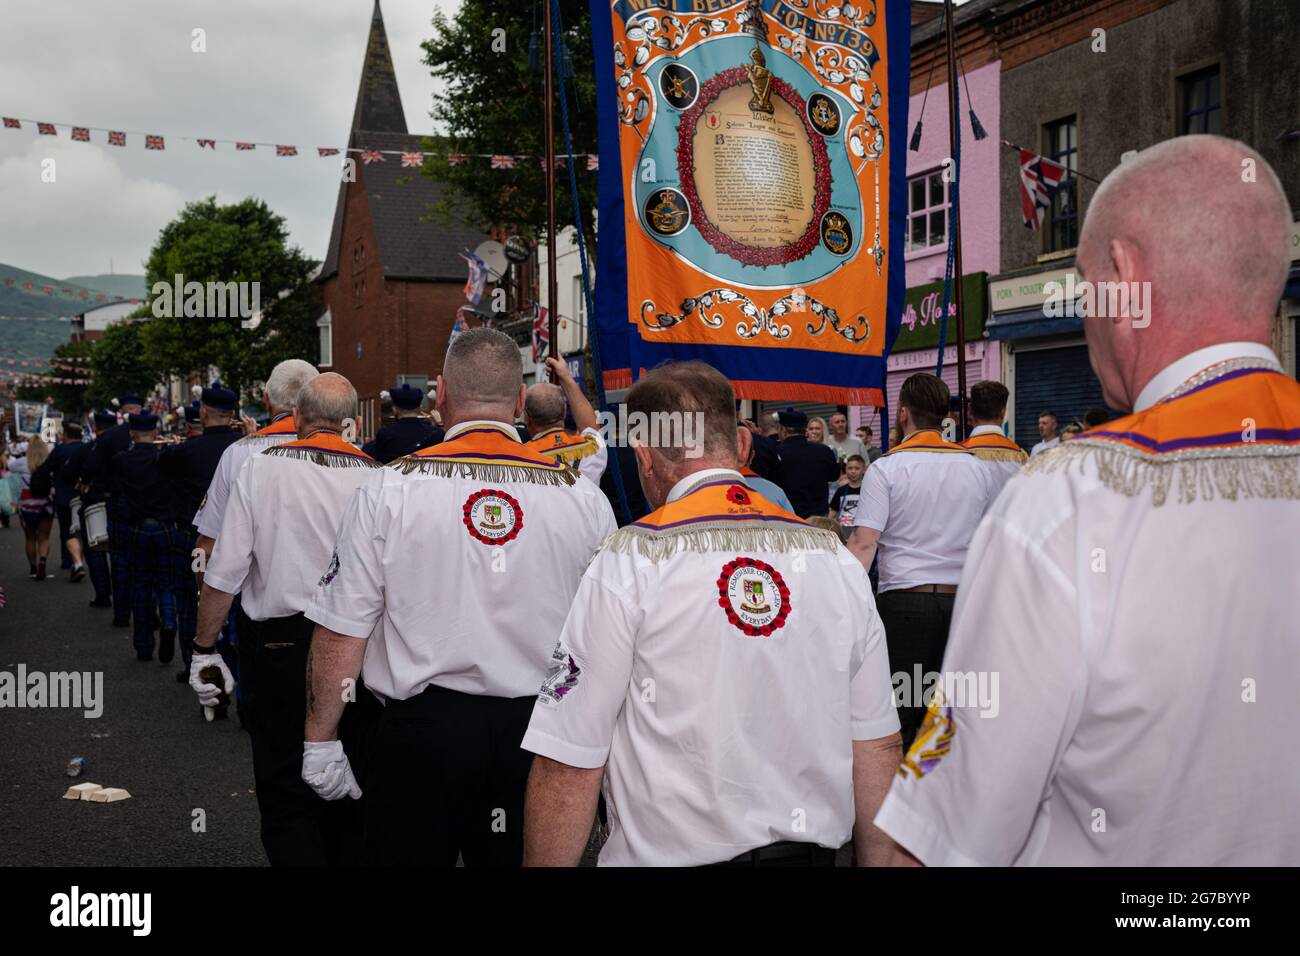 Orangemen march through the staunchly Loyalist Shankill Road during the annual July 12th parades. The annual 12th of July Orange Order parades took place this year after a hiatus due to the pandemic. Despite speculations of a potentially heated weekend due to the Brexit protocols and recent related tensions as well as certain contentions bonfire builds throughout the North, the festivities passed peacefully. The parade season marks the anniversary of the protestant King William of Orange's victory over the Catholic forces of King James at the Battle of the Boyne in 1690. (Photo by Graham Marti Stock Photo